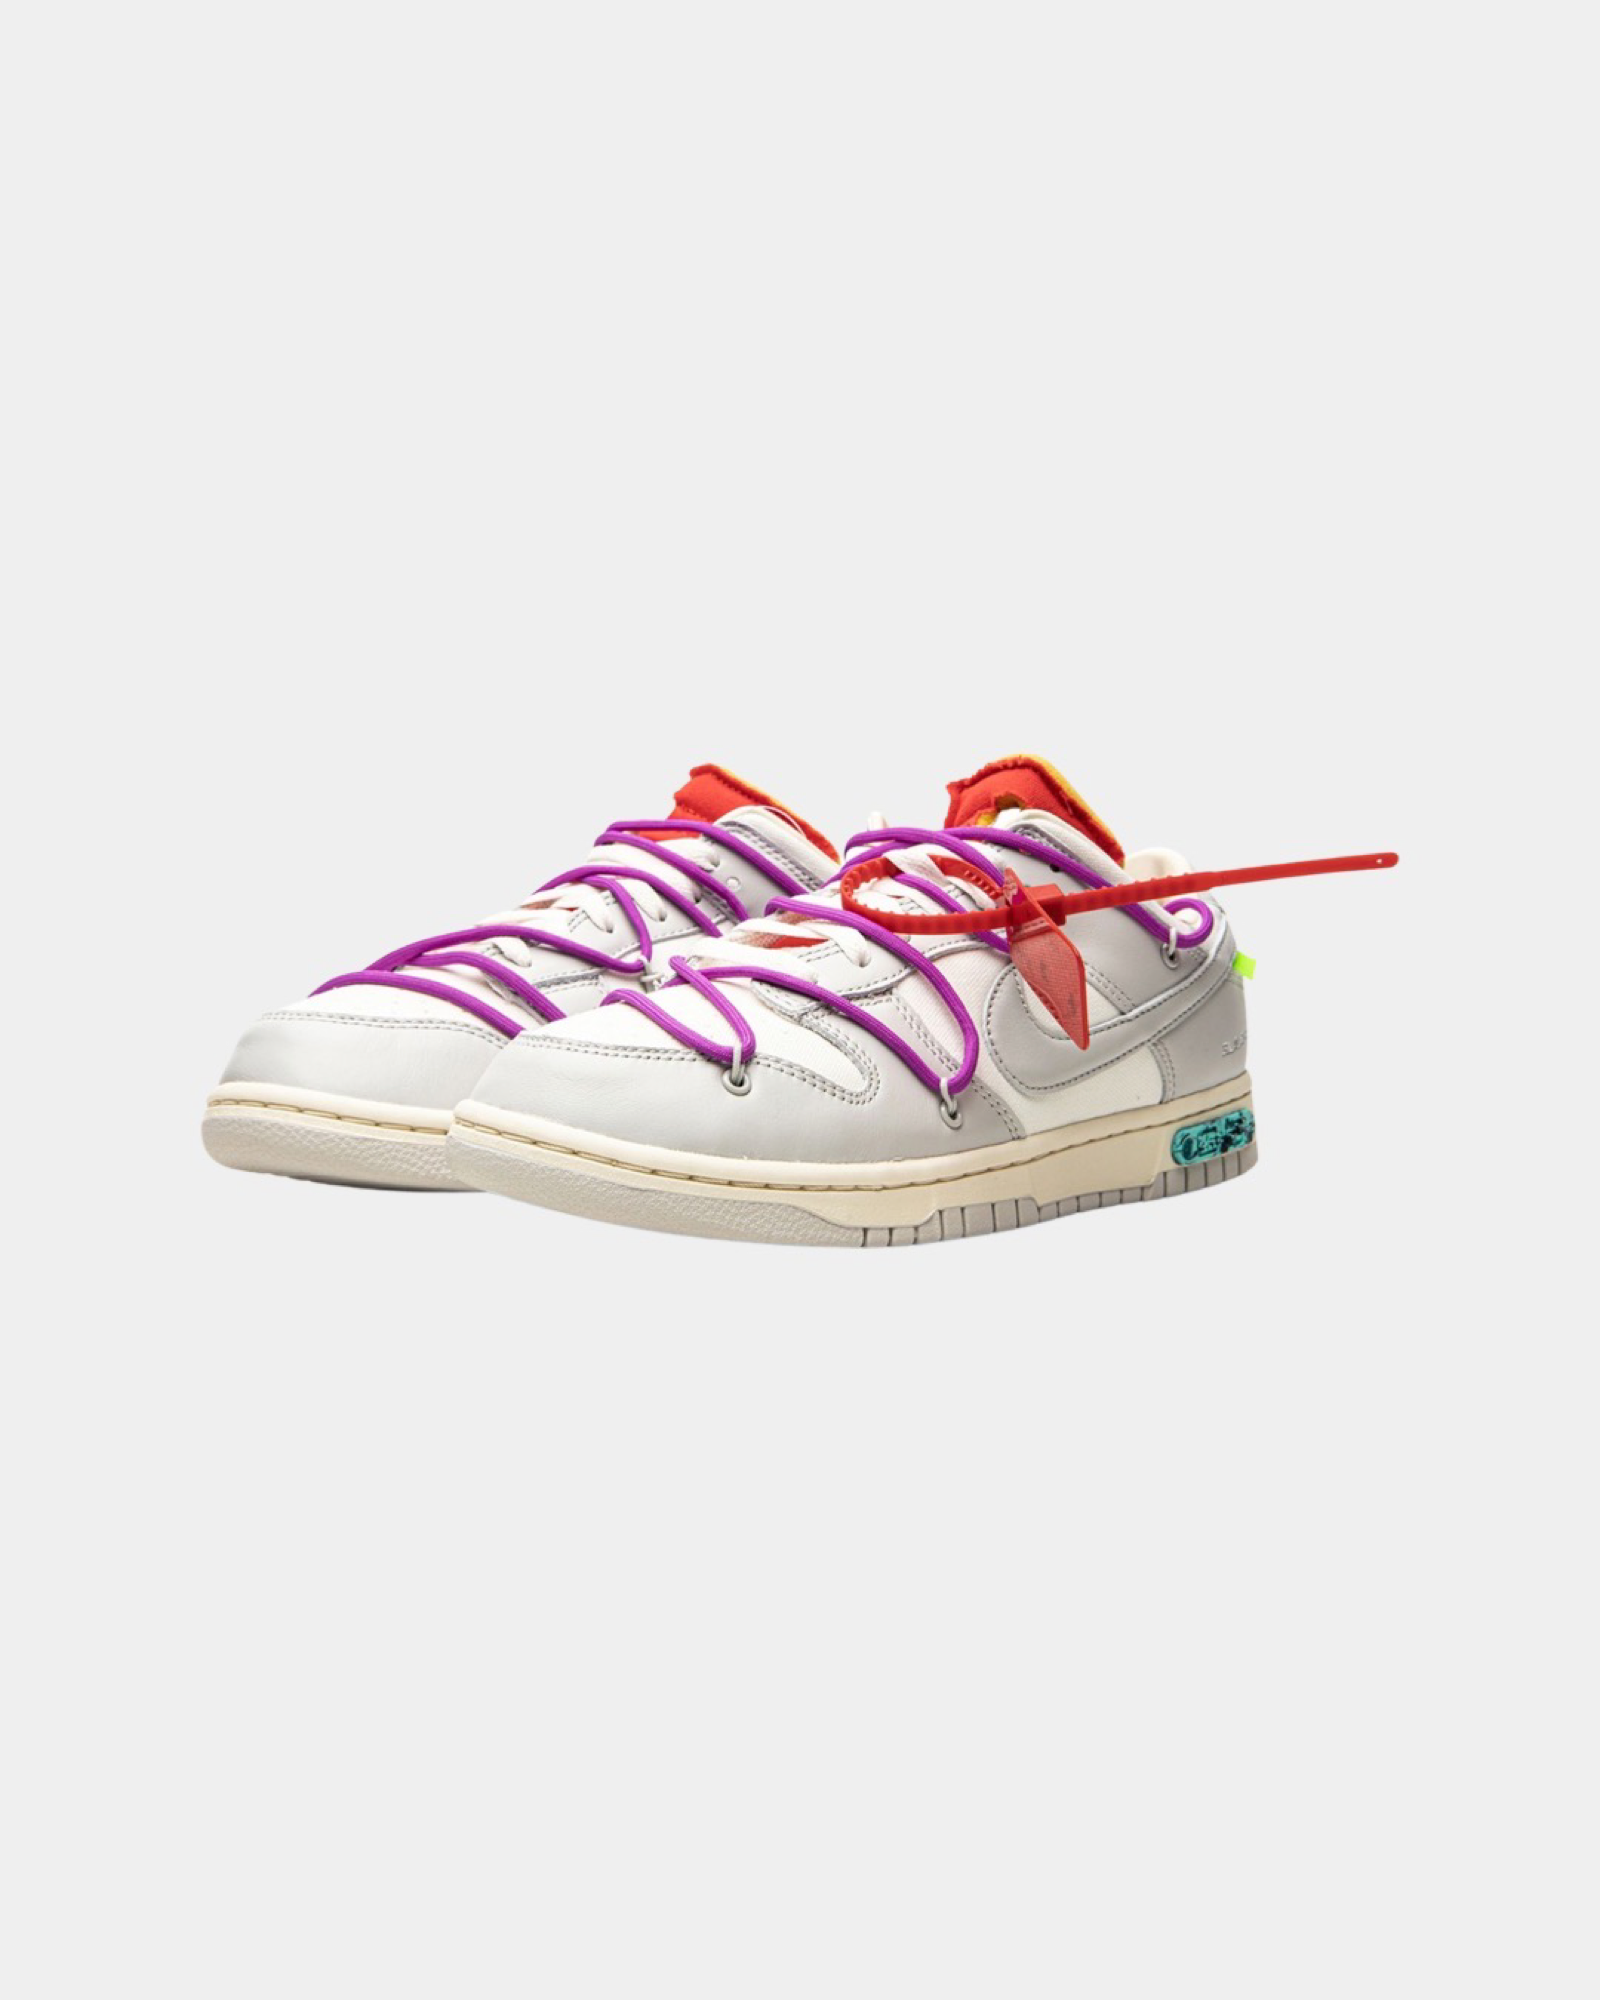 SALE人気セールNIKE DUNK LOW OFF-WHITE 45 of 50 スニーカー